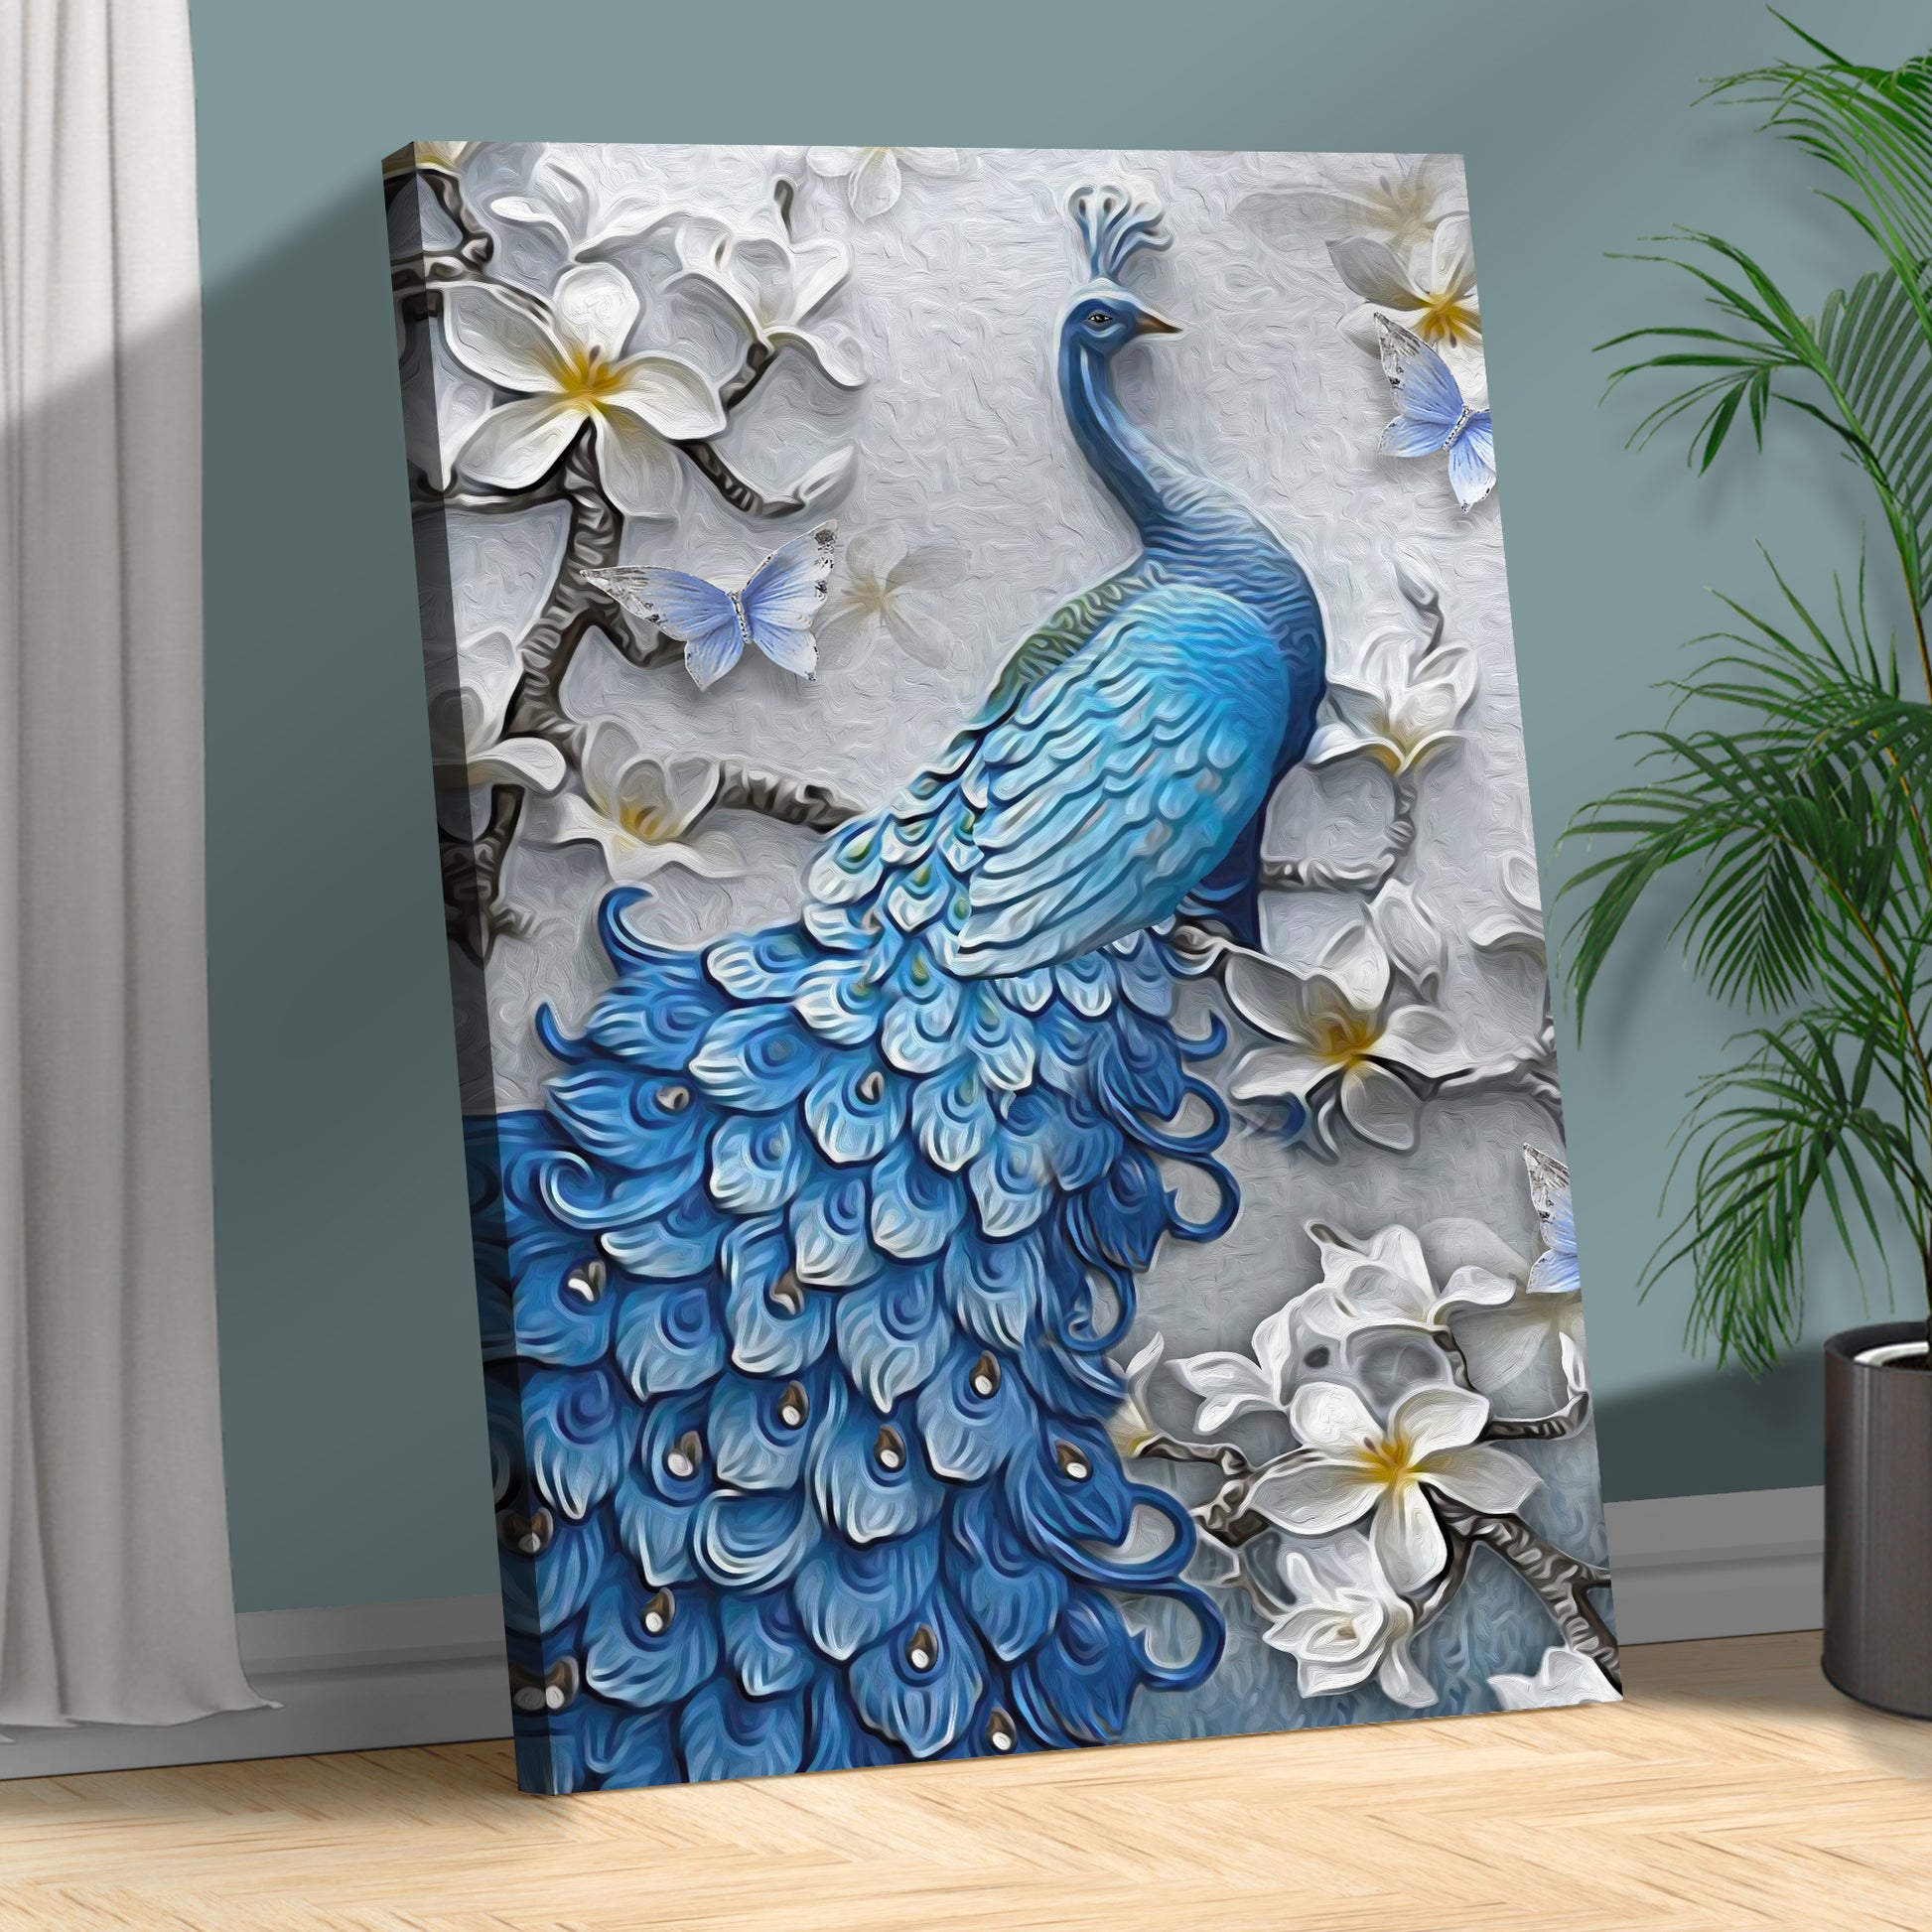 Elegant Peacock and White Magnolias Painting Portrait Canvas Wall Art Style 2 - Image by Tailored Canvases